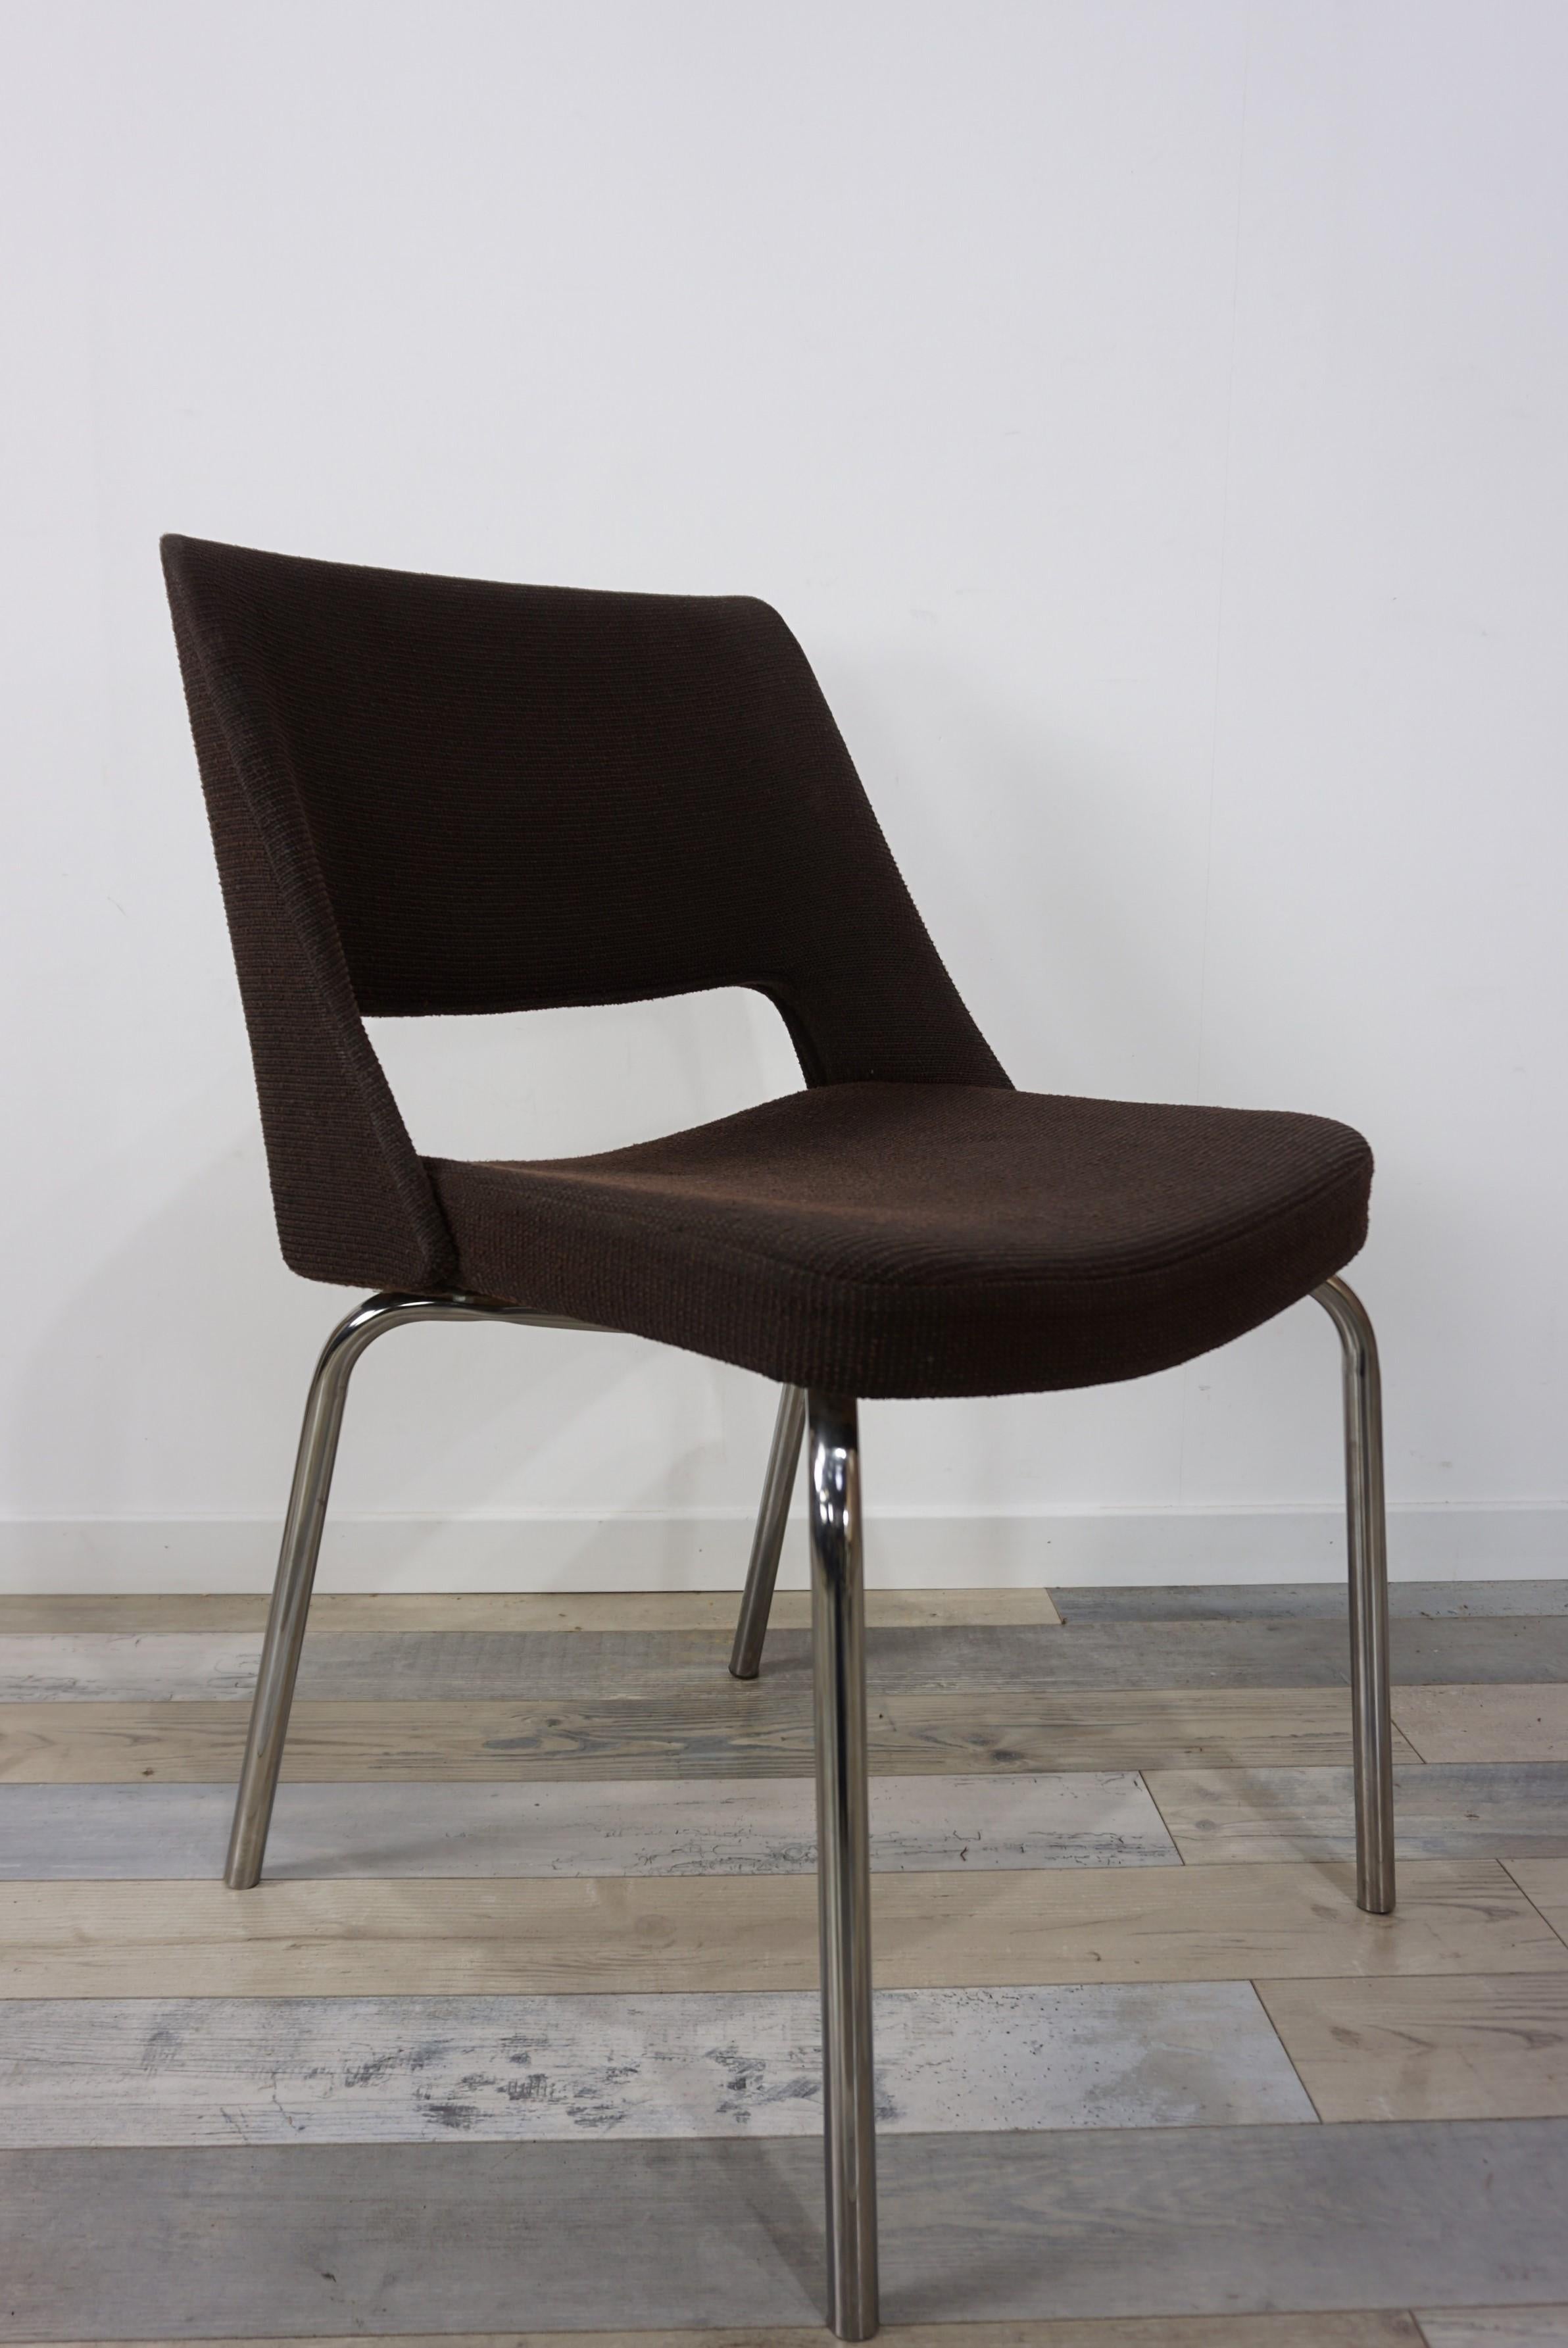 Midcentury Design Conference Chair 1